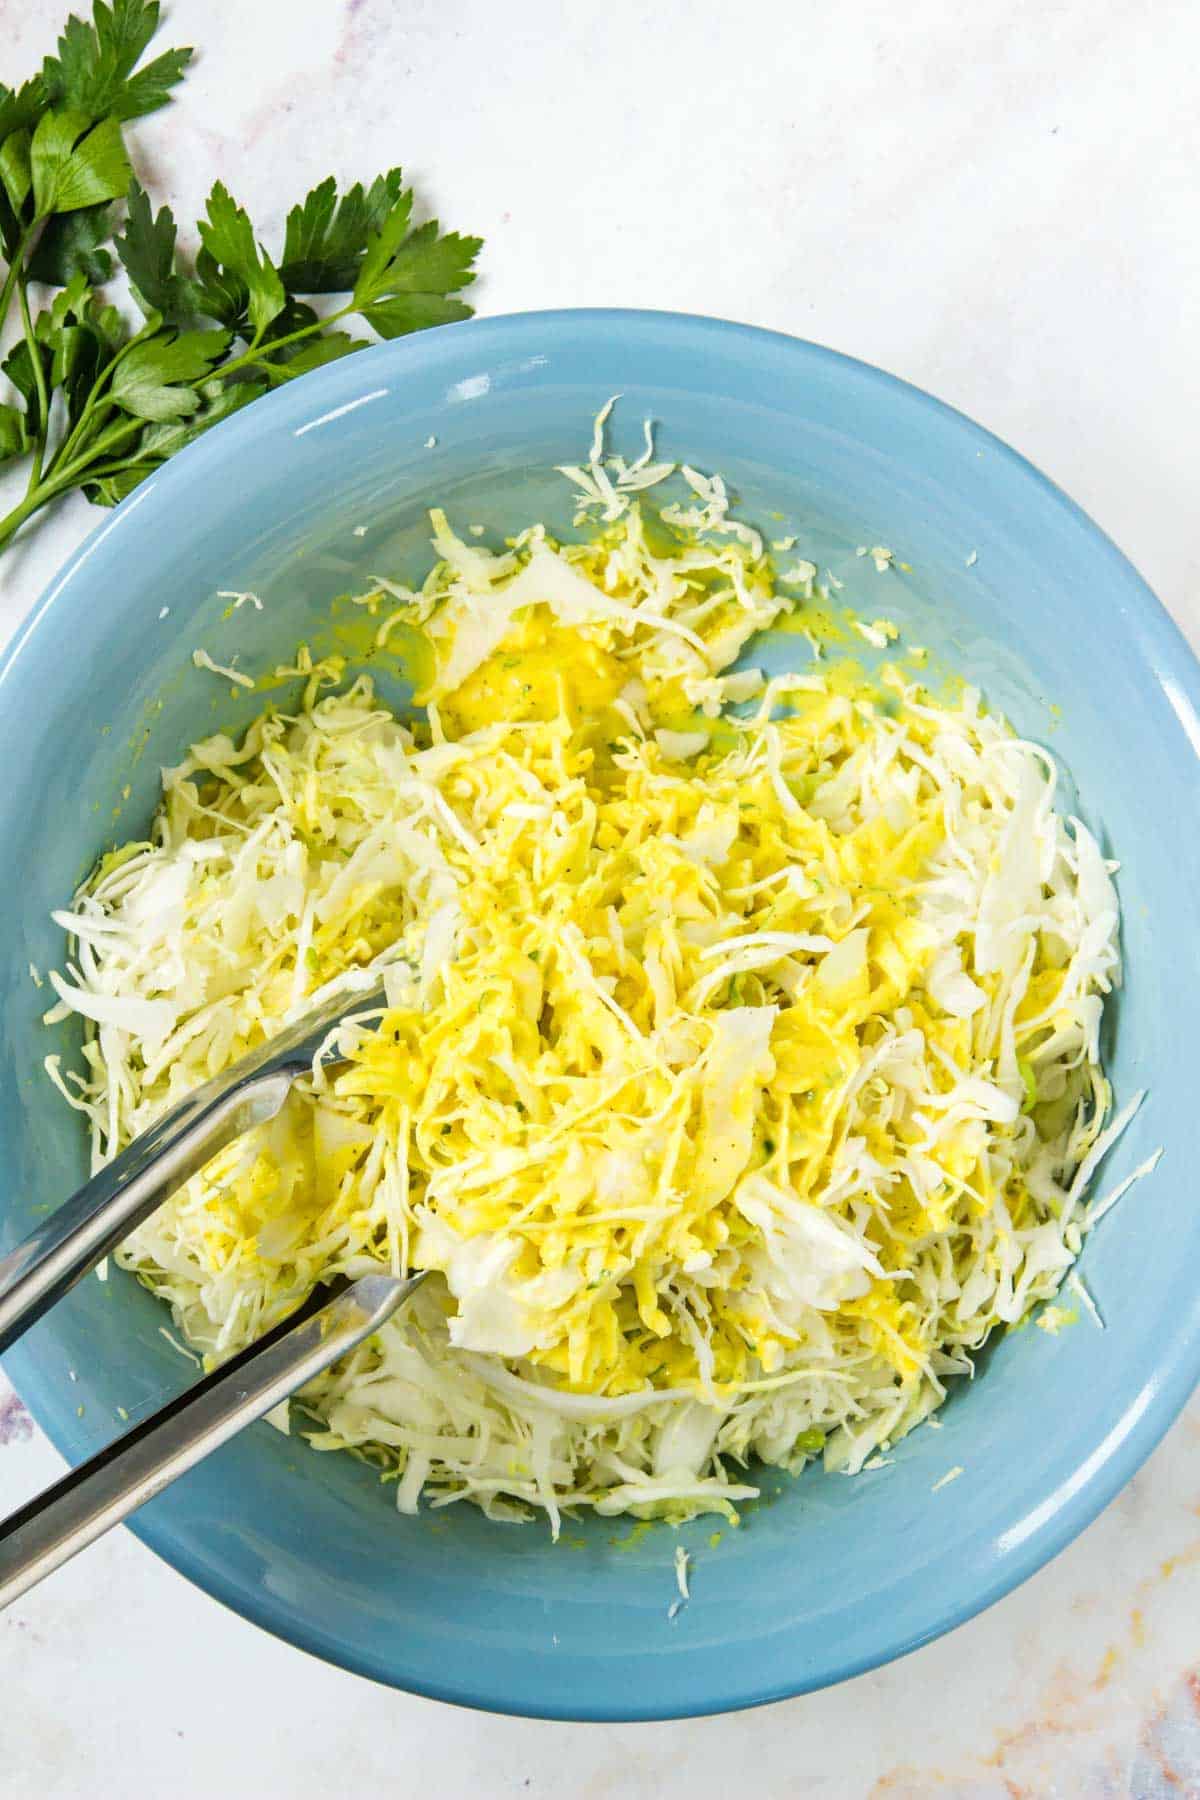 Coleslaw mixed is tossed in a creamy yellow mustard dressing.